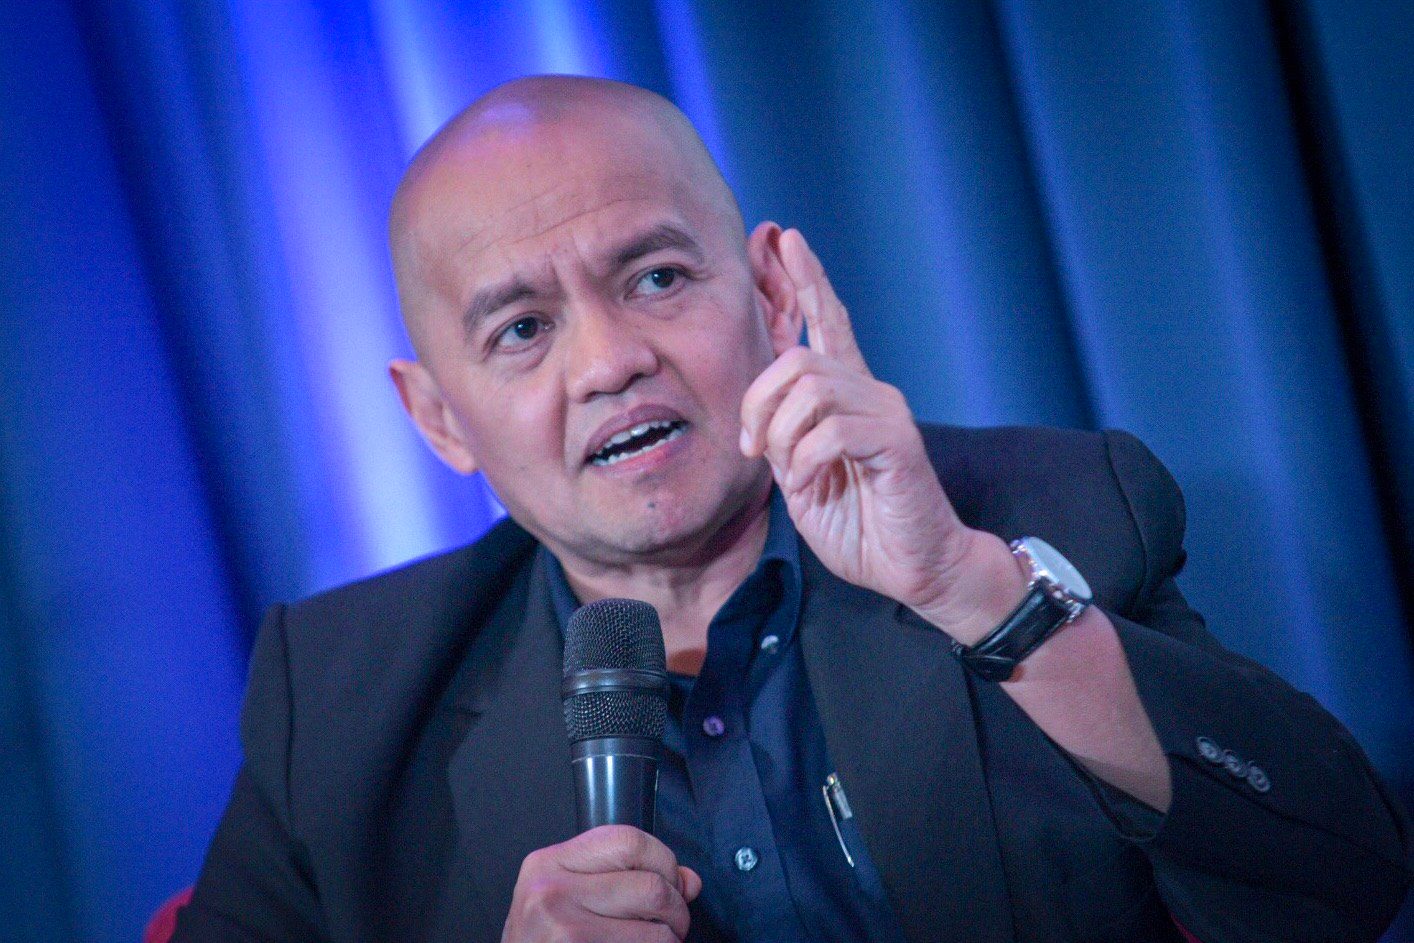 Leonen: Integrity can’t be measured by piece of paper alone